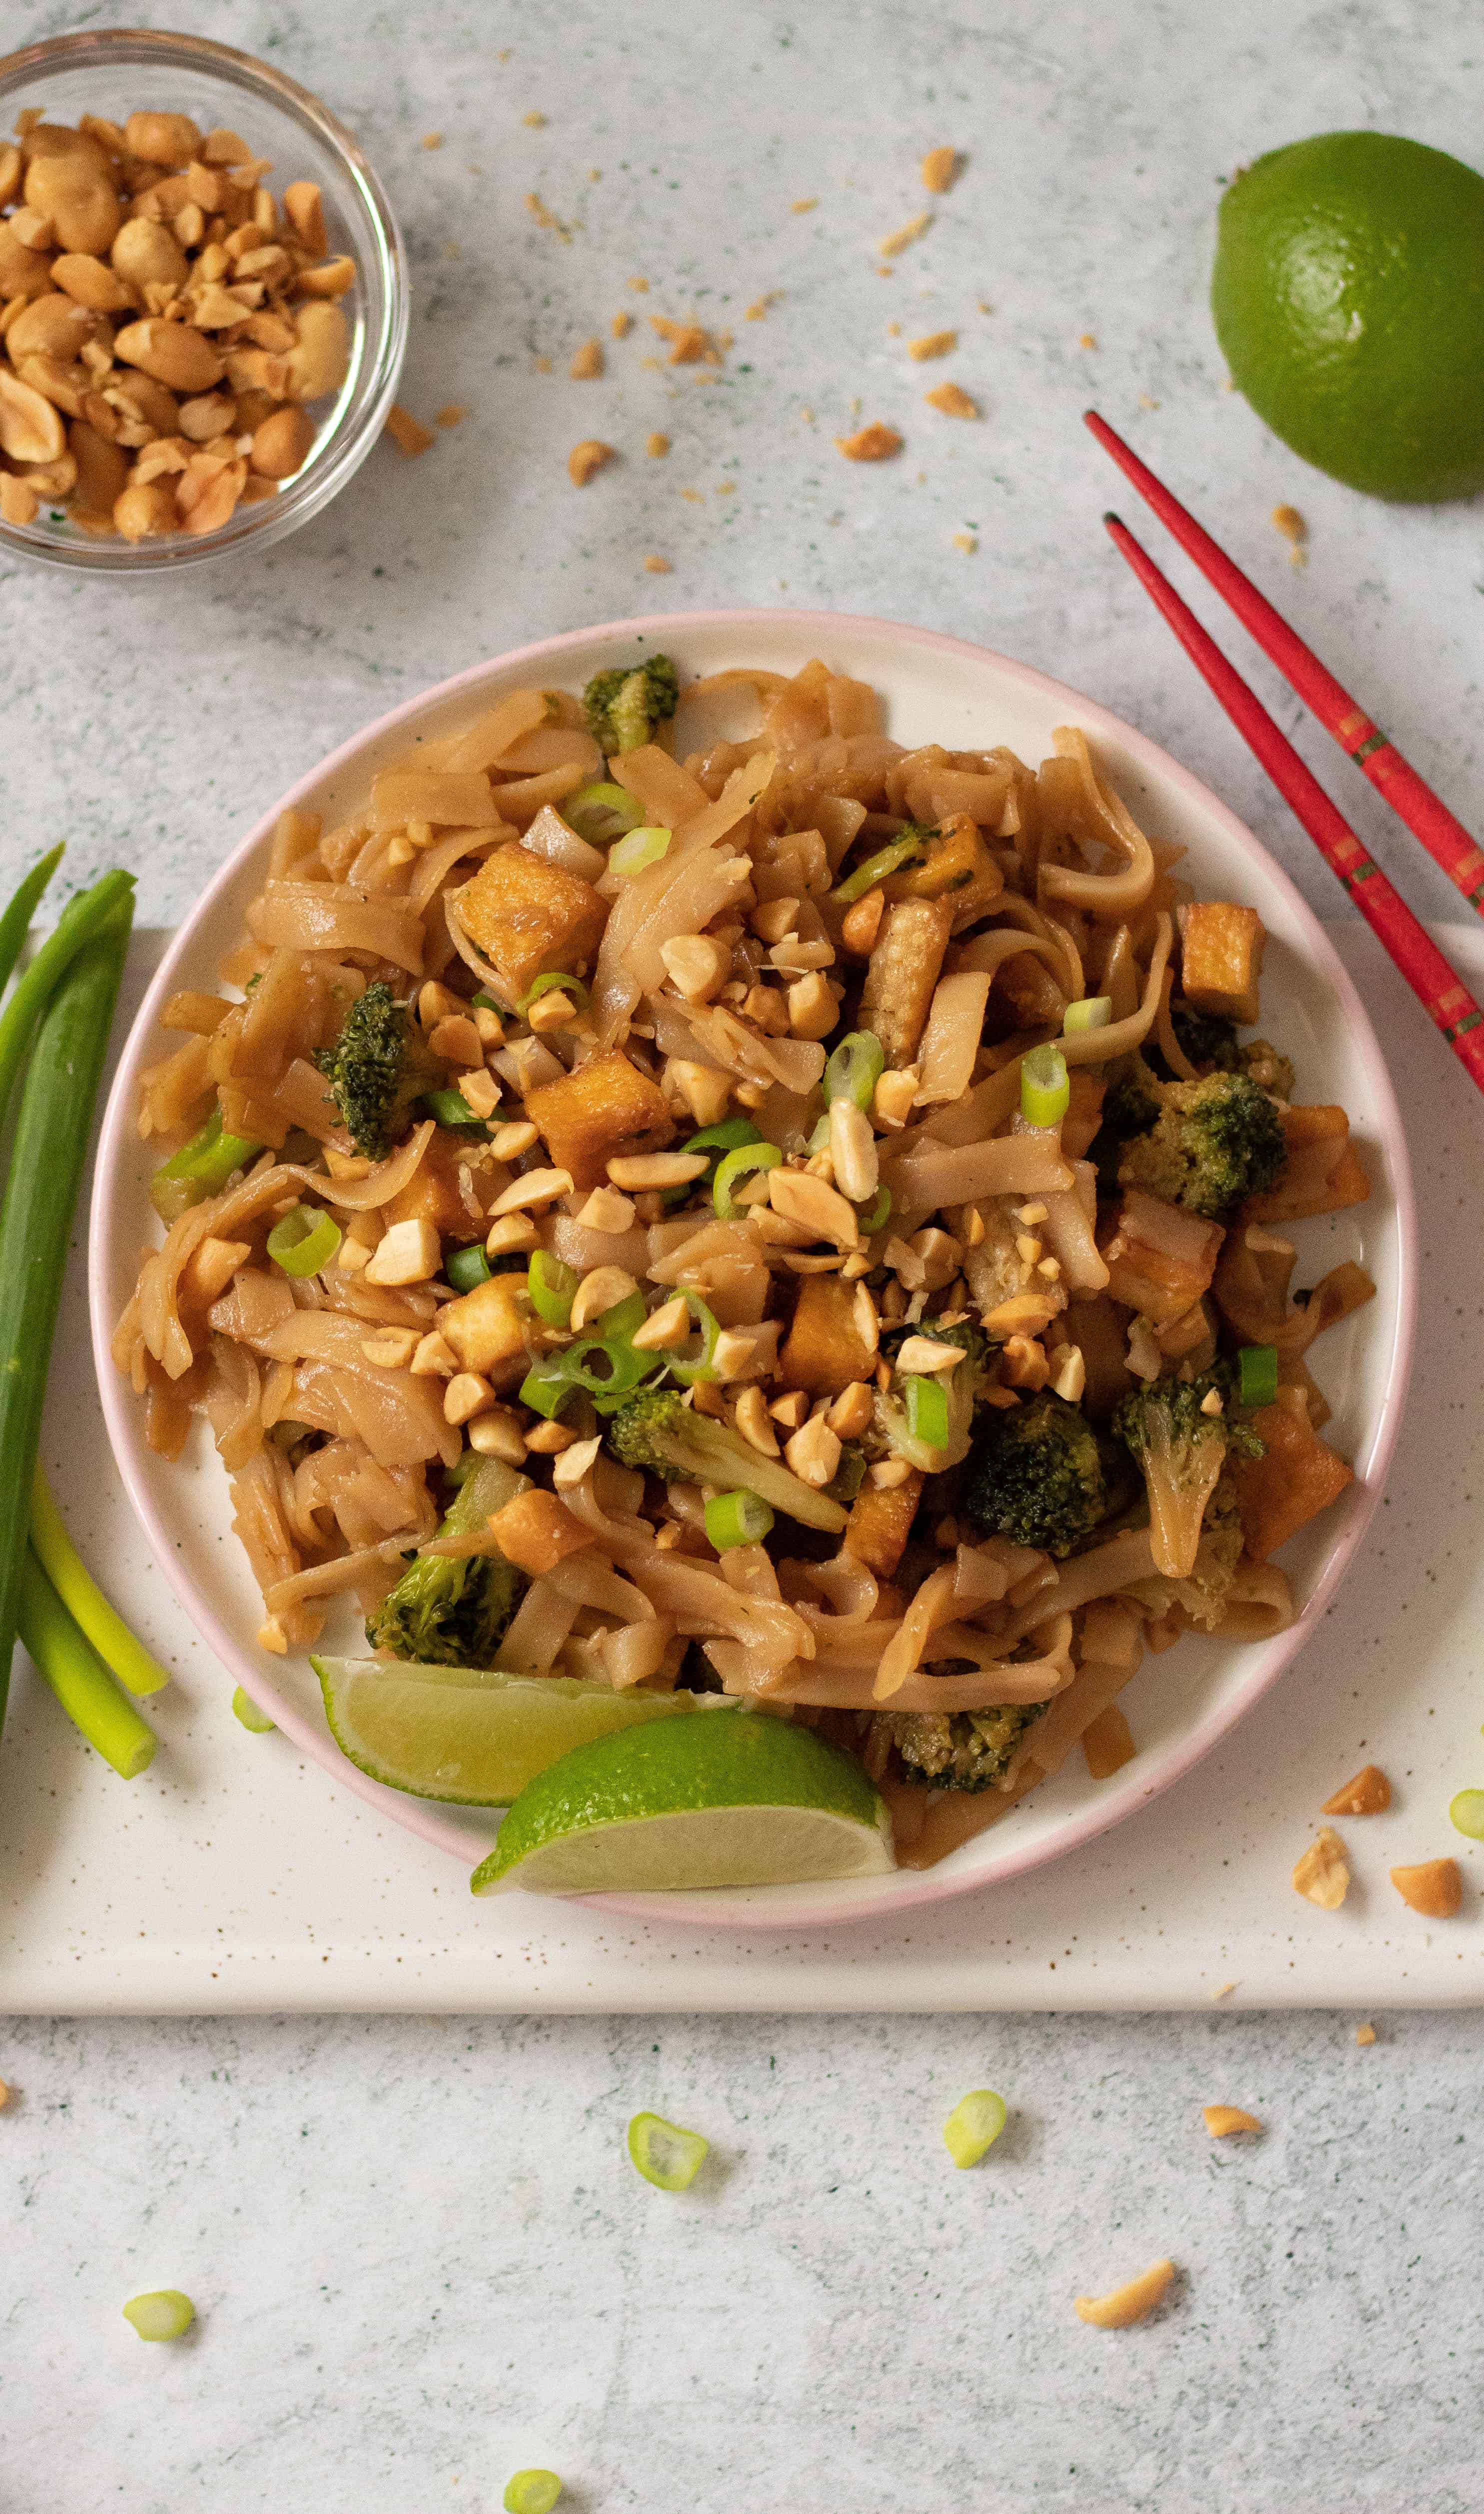 Vegan Rice Noodle Stir Fry with Tofu and Veggies - a tasty, beginner friendly, Pad Thai-inspired meal, that is super nutritious. | The Green Loot #vegan #veganrecipes #healthyeating #healthyrecipes #Asianrecipes